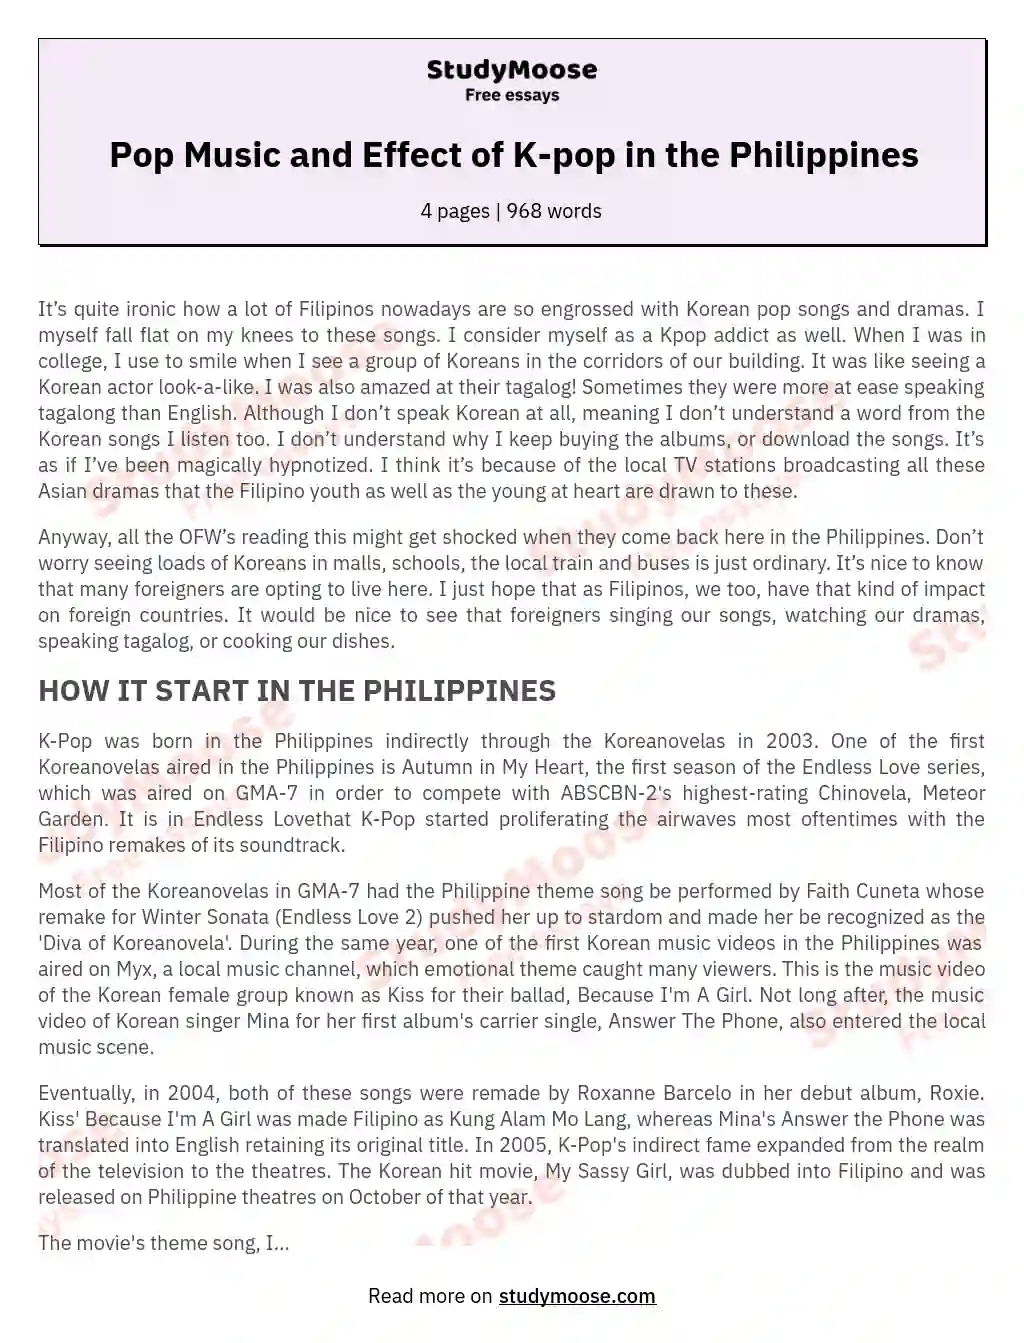 Pop Music and Effect of K-pop in the Philippines essay